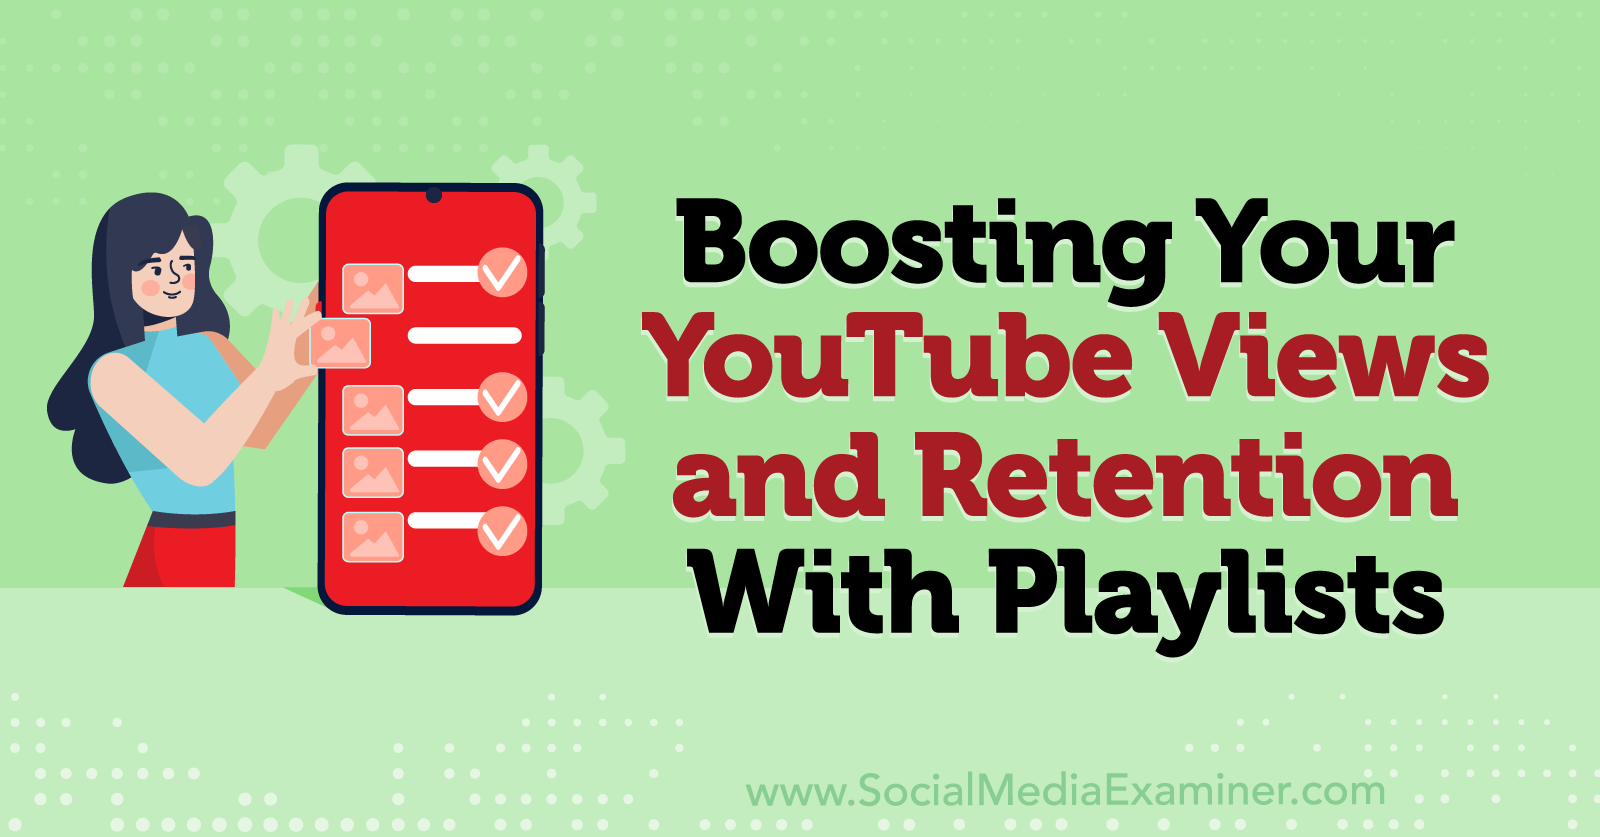 Boosting Your YouTube Views and Retention With Playlists by Social Media Examiner